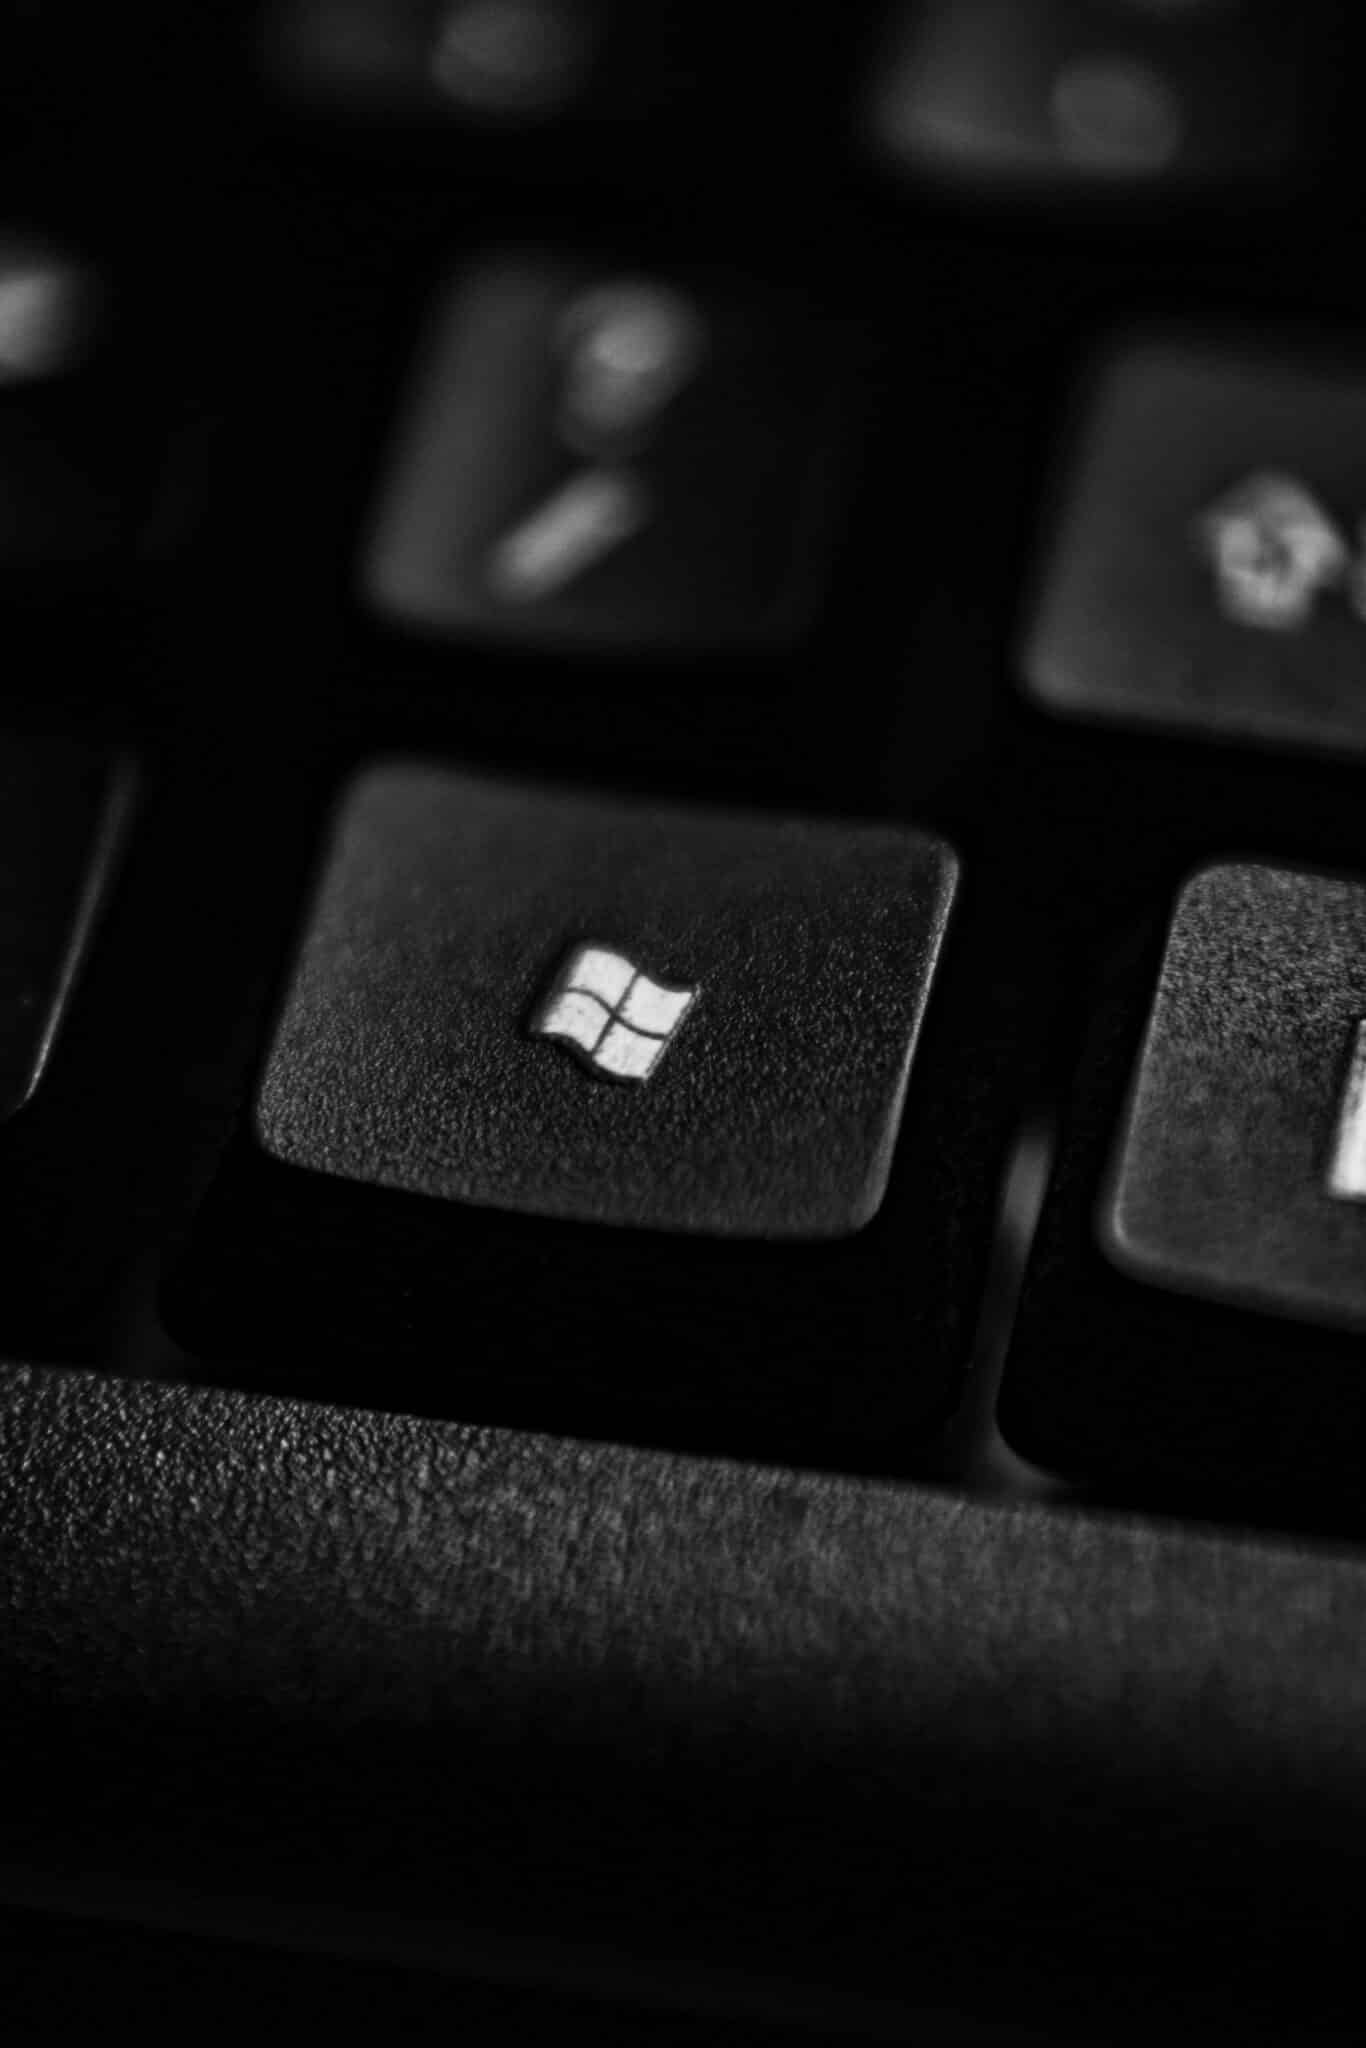 a close up view of a keyboard with the microsoft logo on it